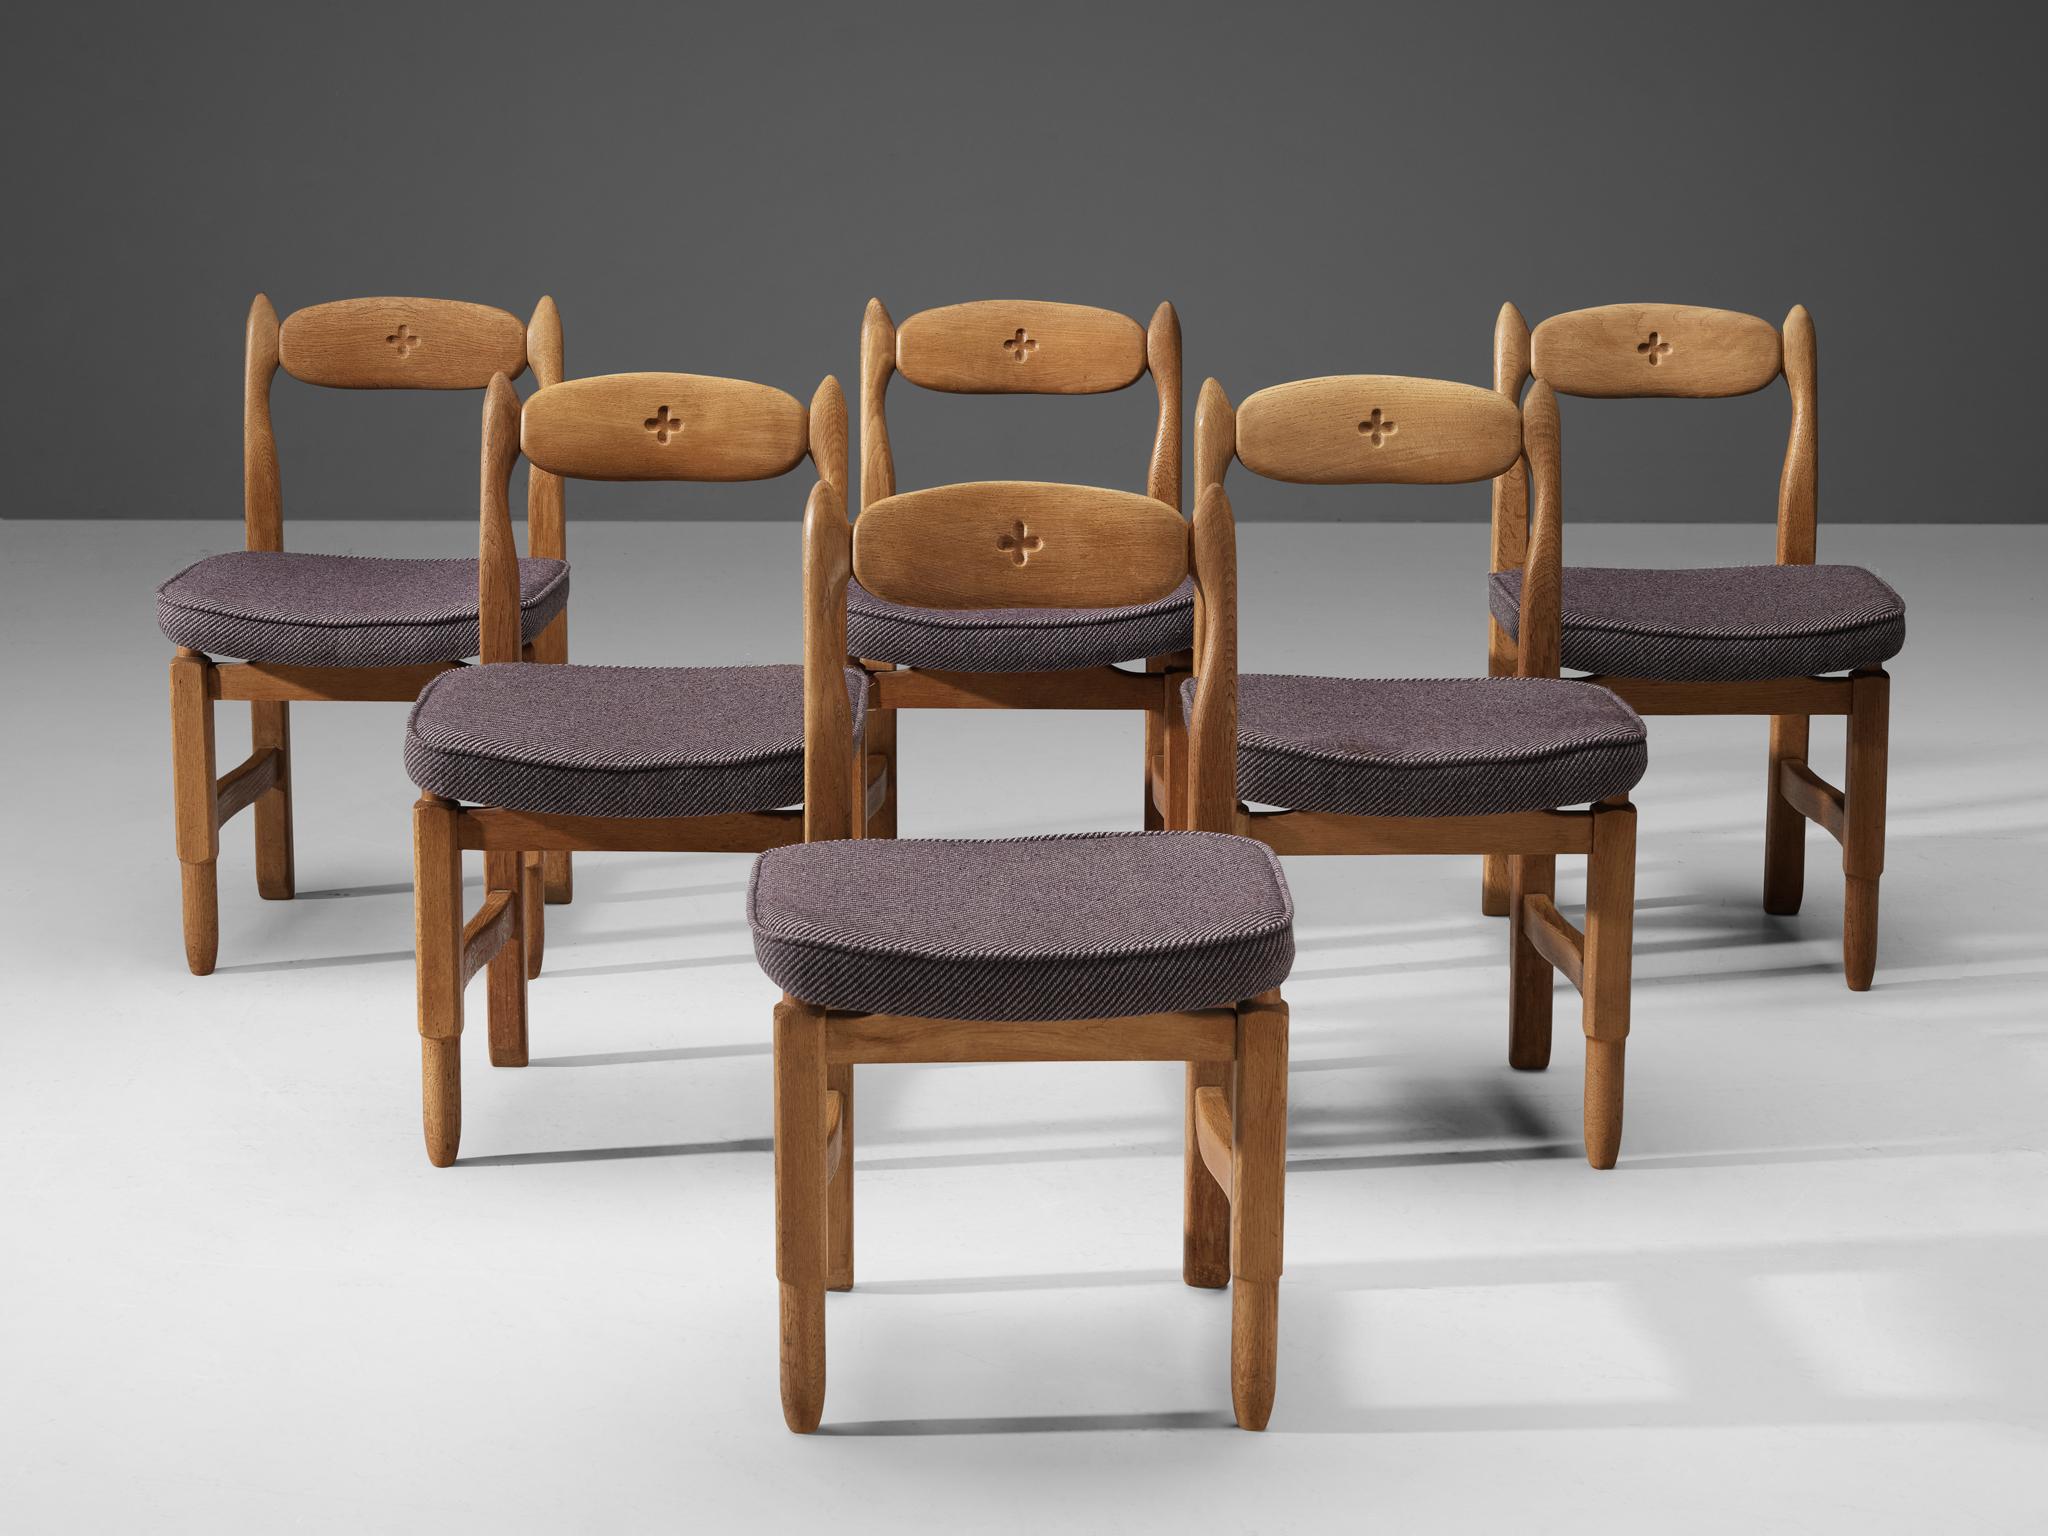 Guillerme et Chambron for Votre Maison, dining chairs, fabric, solid oak, France, 1960s

These distinctive chairs in oak are designed by the French designer duo Jacques Chambron and Robert Guillerme. This dining chair shows organic and robust